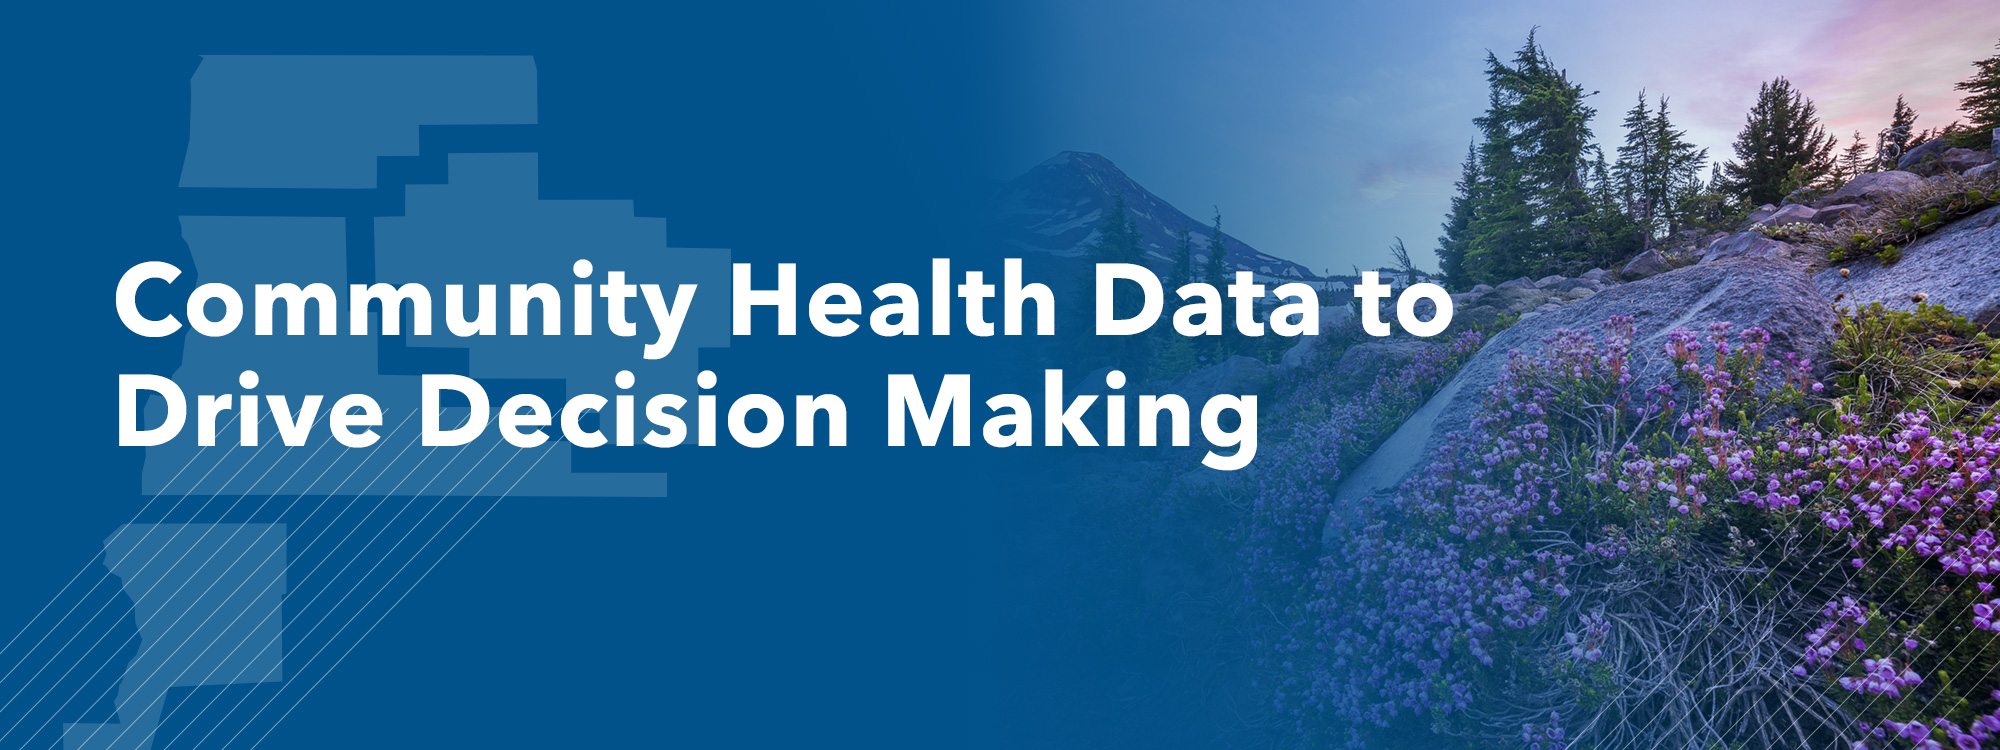 Community Health Data to Drive Decision Making